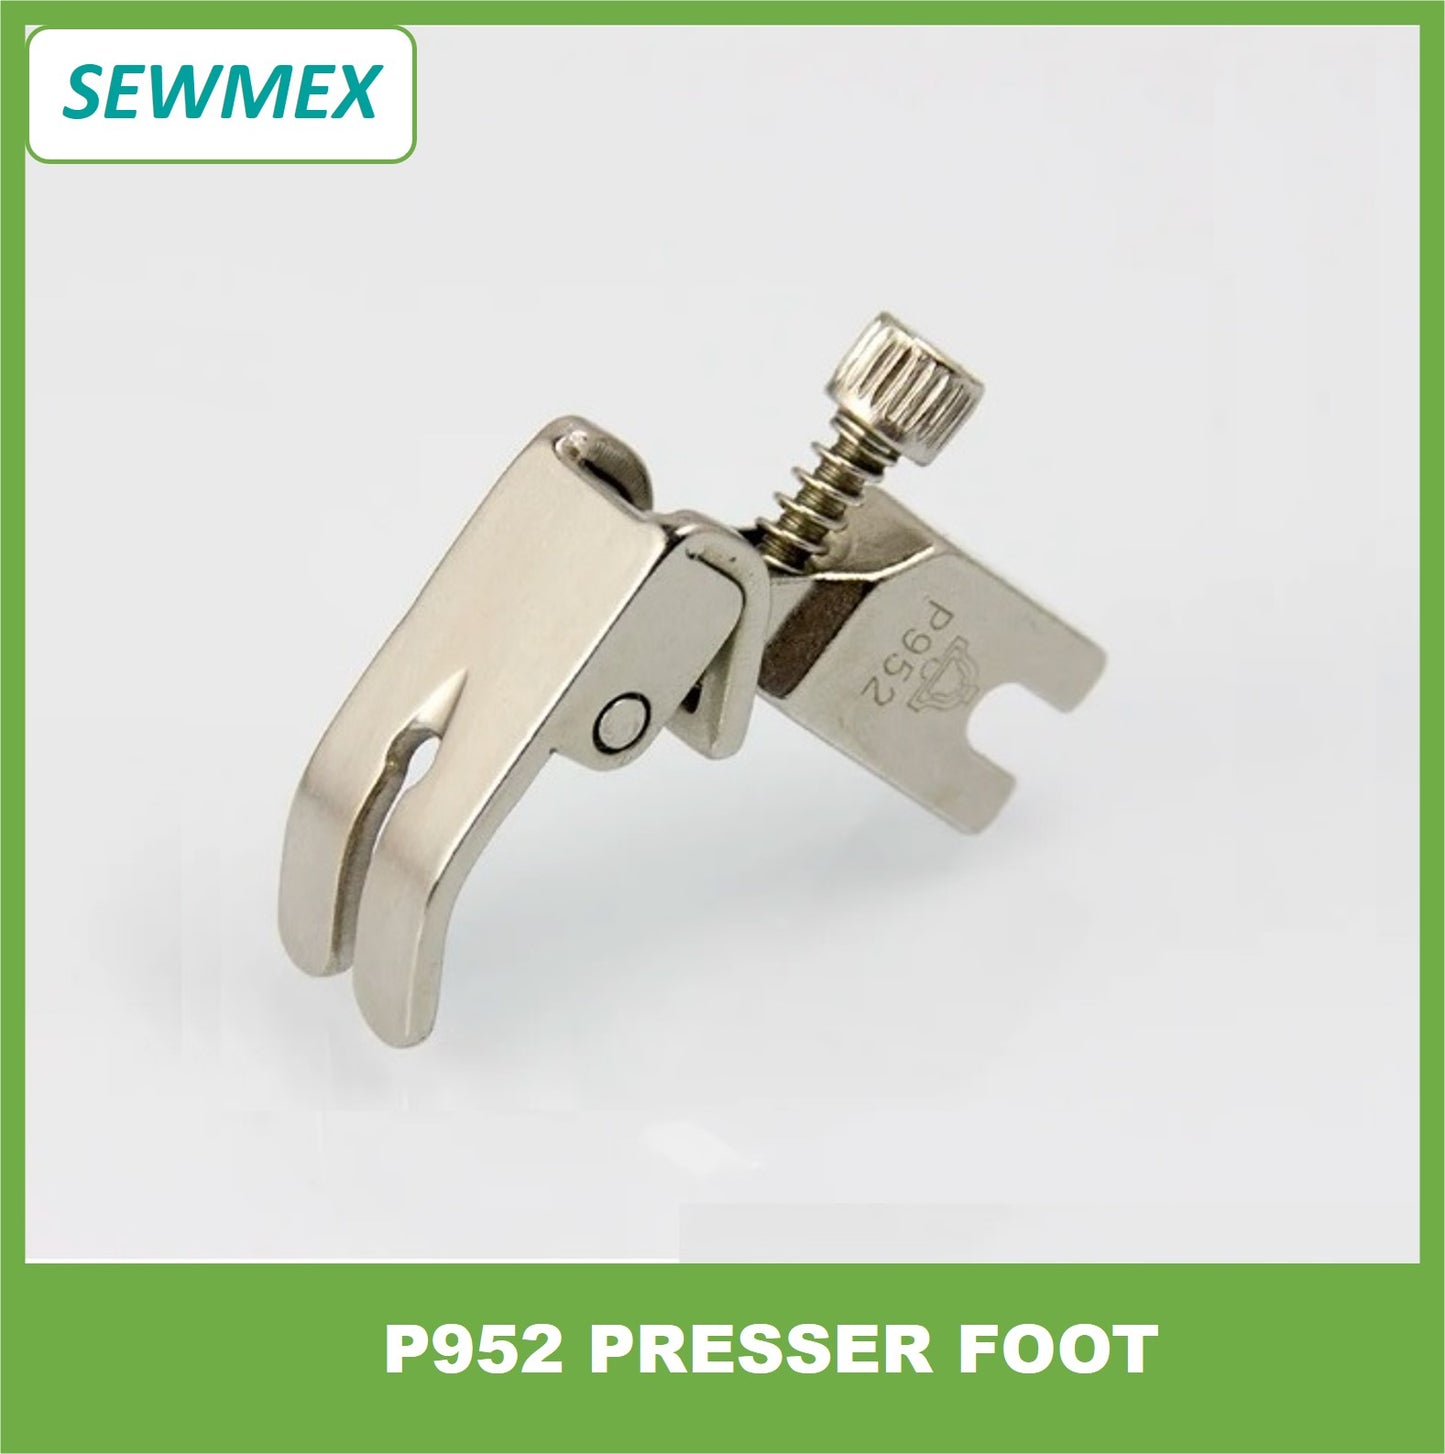 P952 Presser Foot with screw adjustable for flat wagon Steel